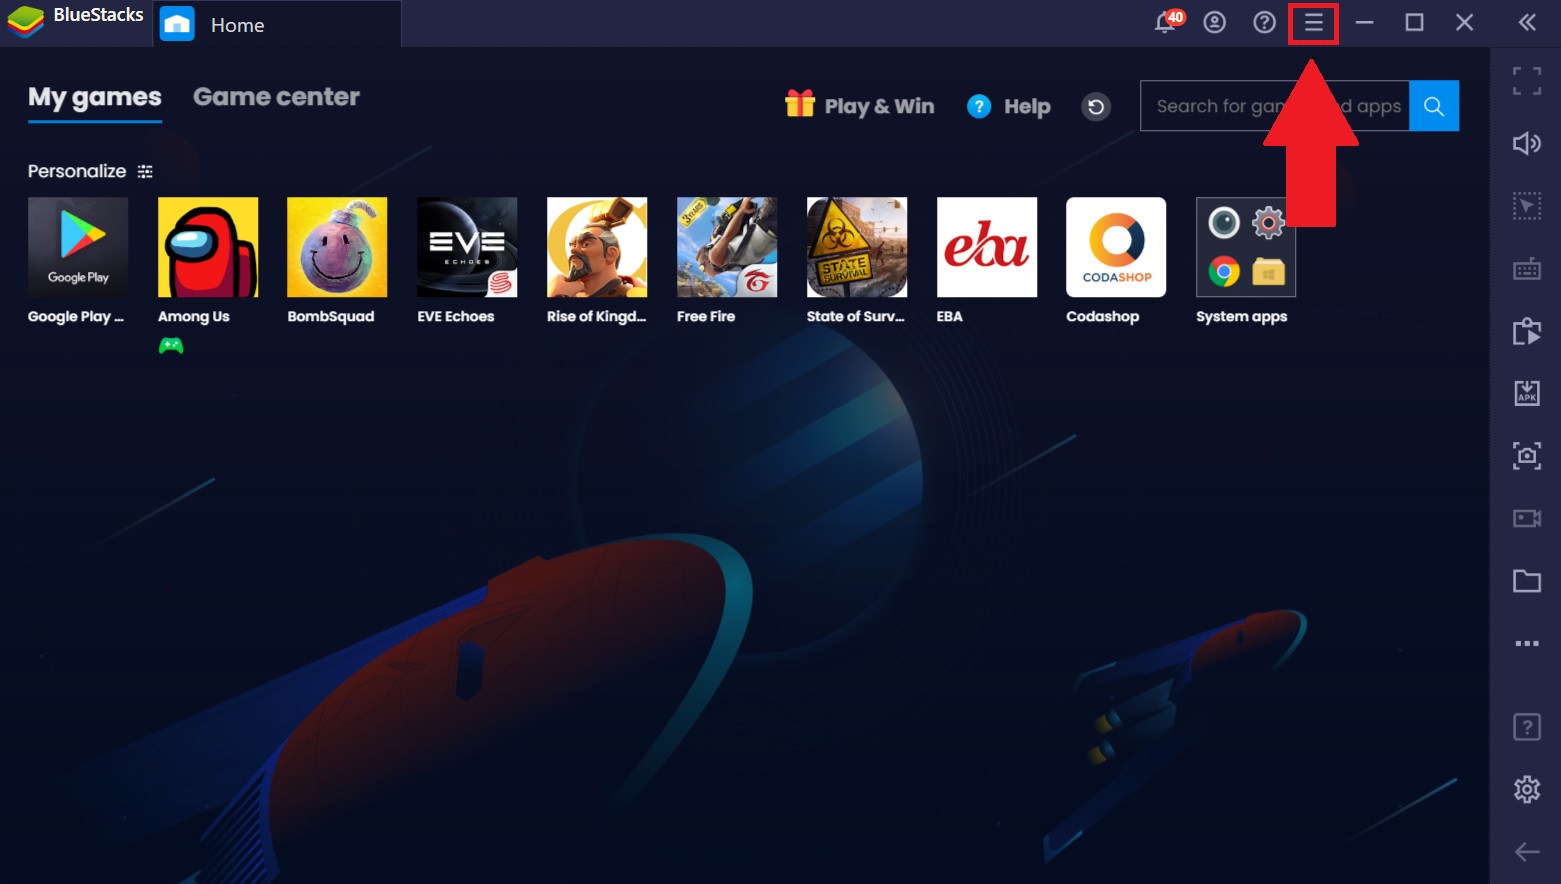 how to use bluestacks 4 without google login